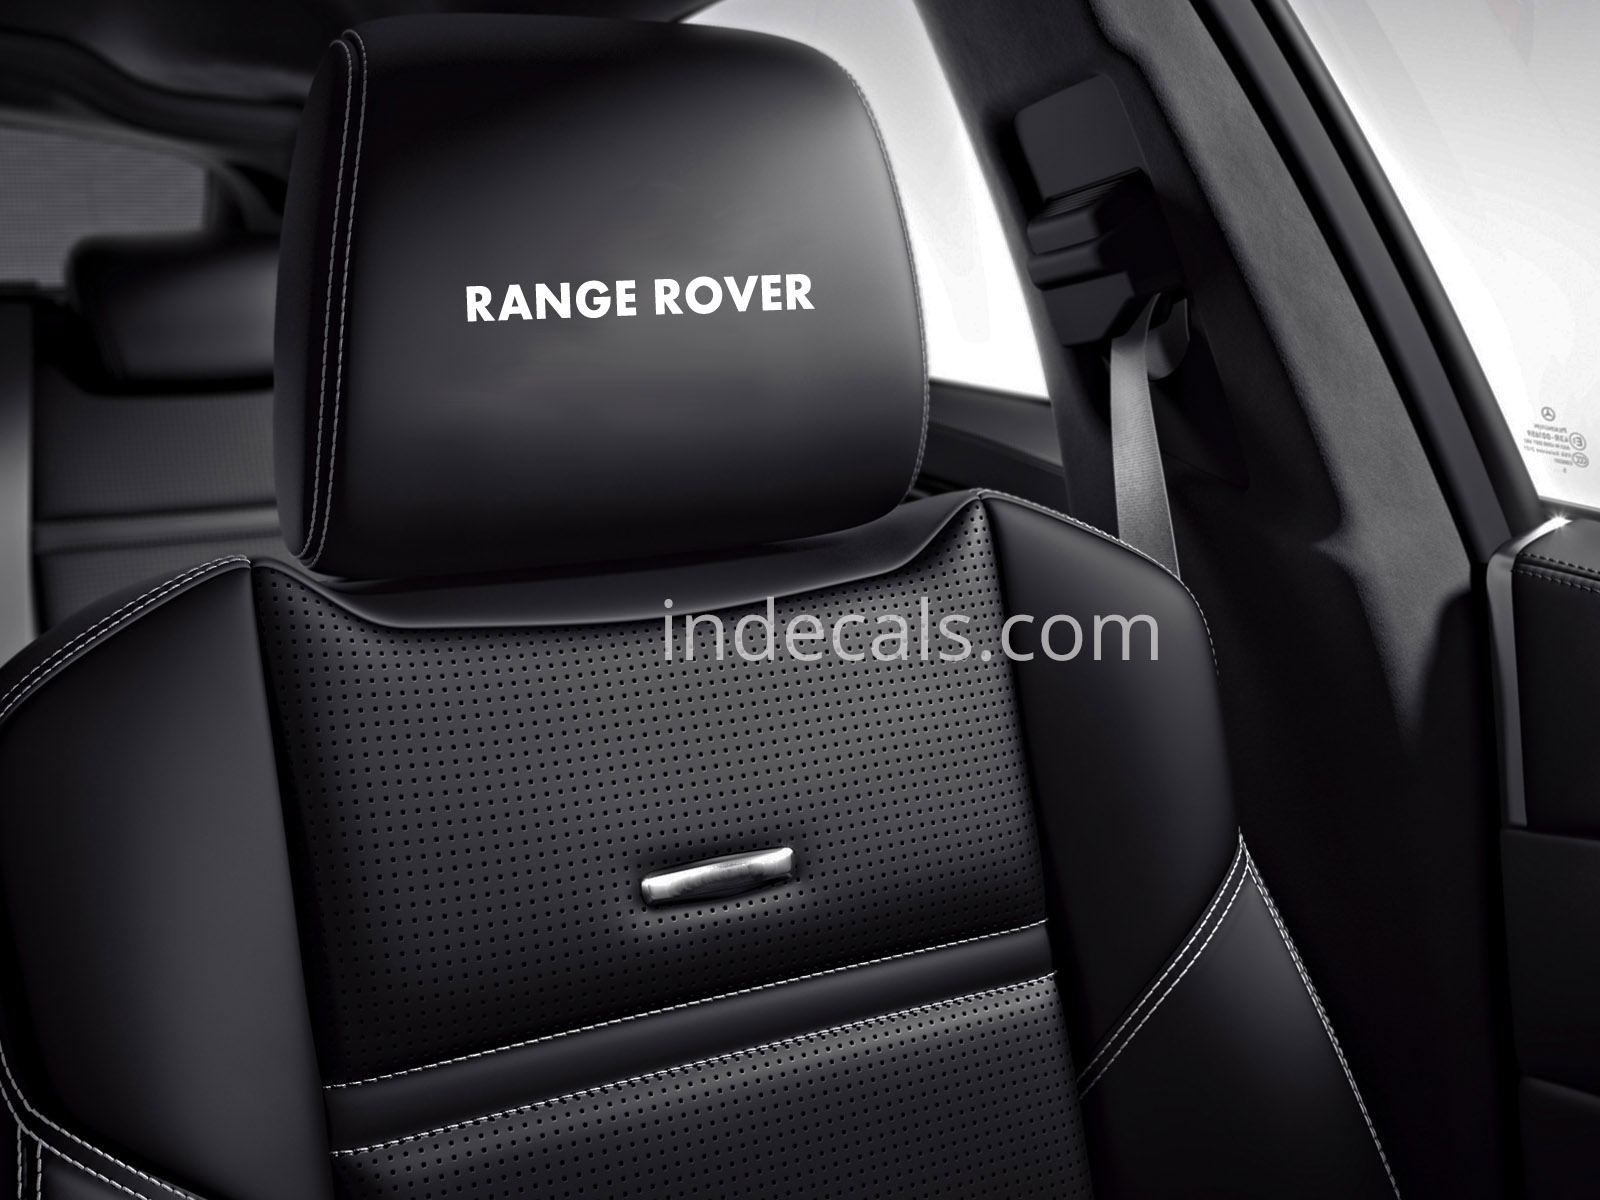 6 x Range Rover Stickers for Headrests - White